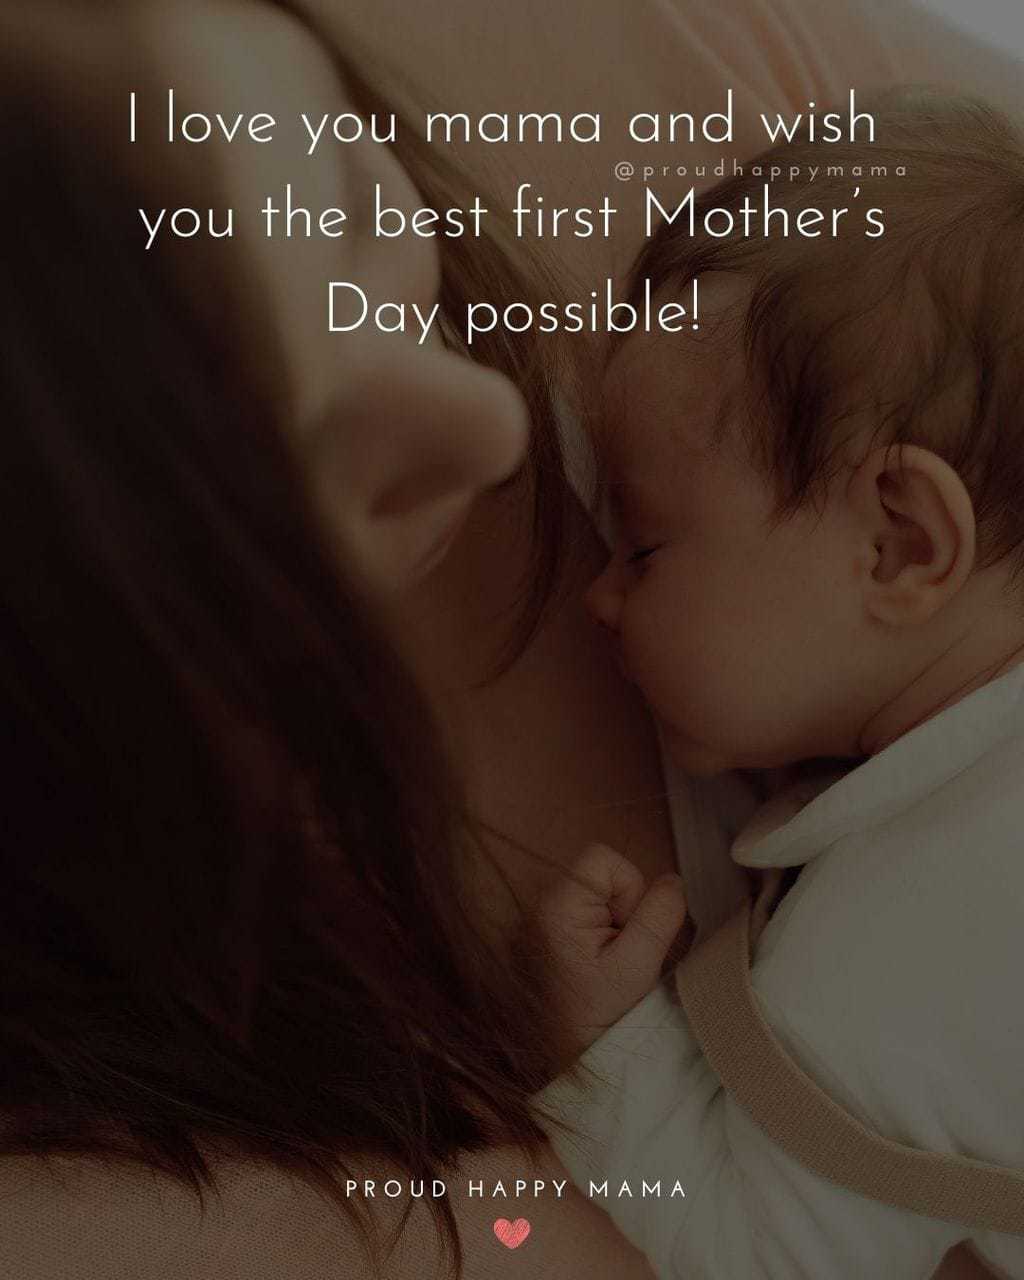 First Mothers Day Quotes - I love you mama and wish you the best first Mother’s Day possible!’